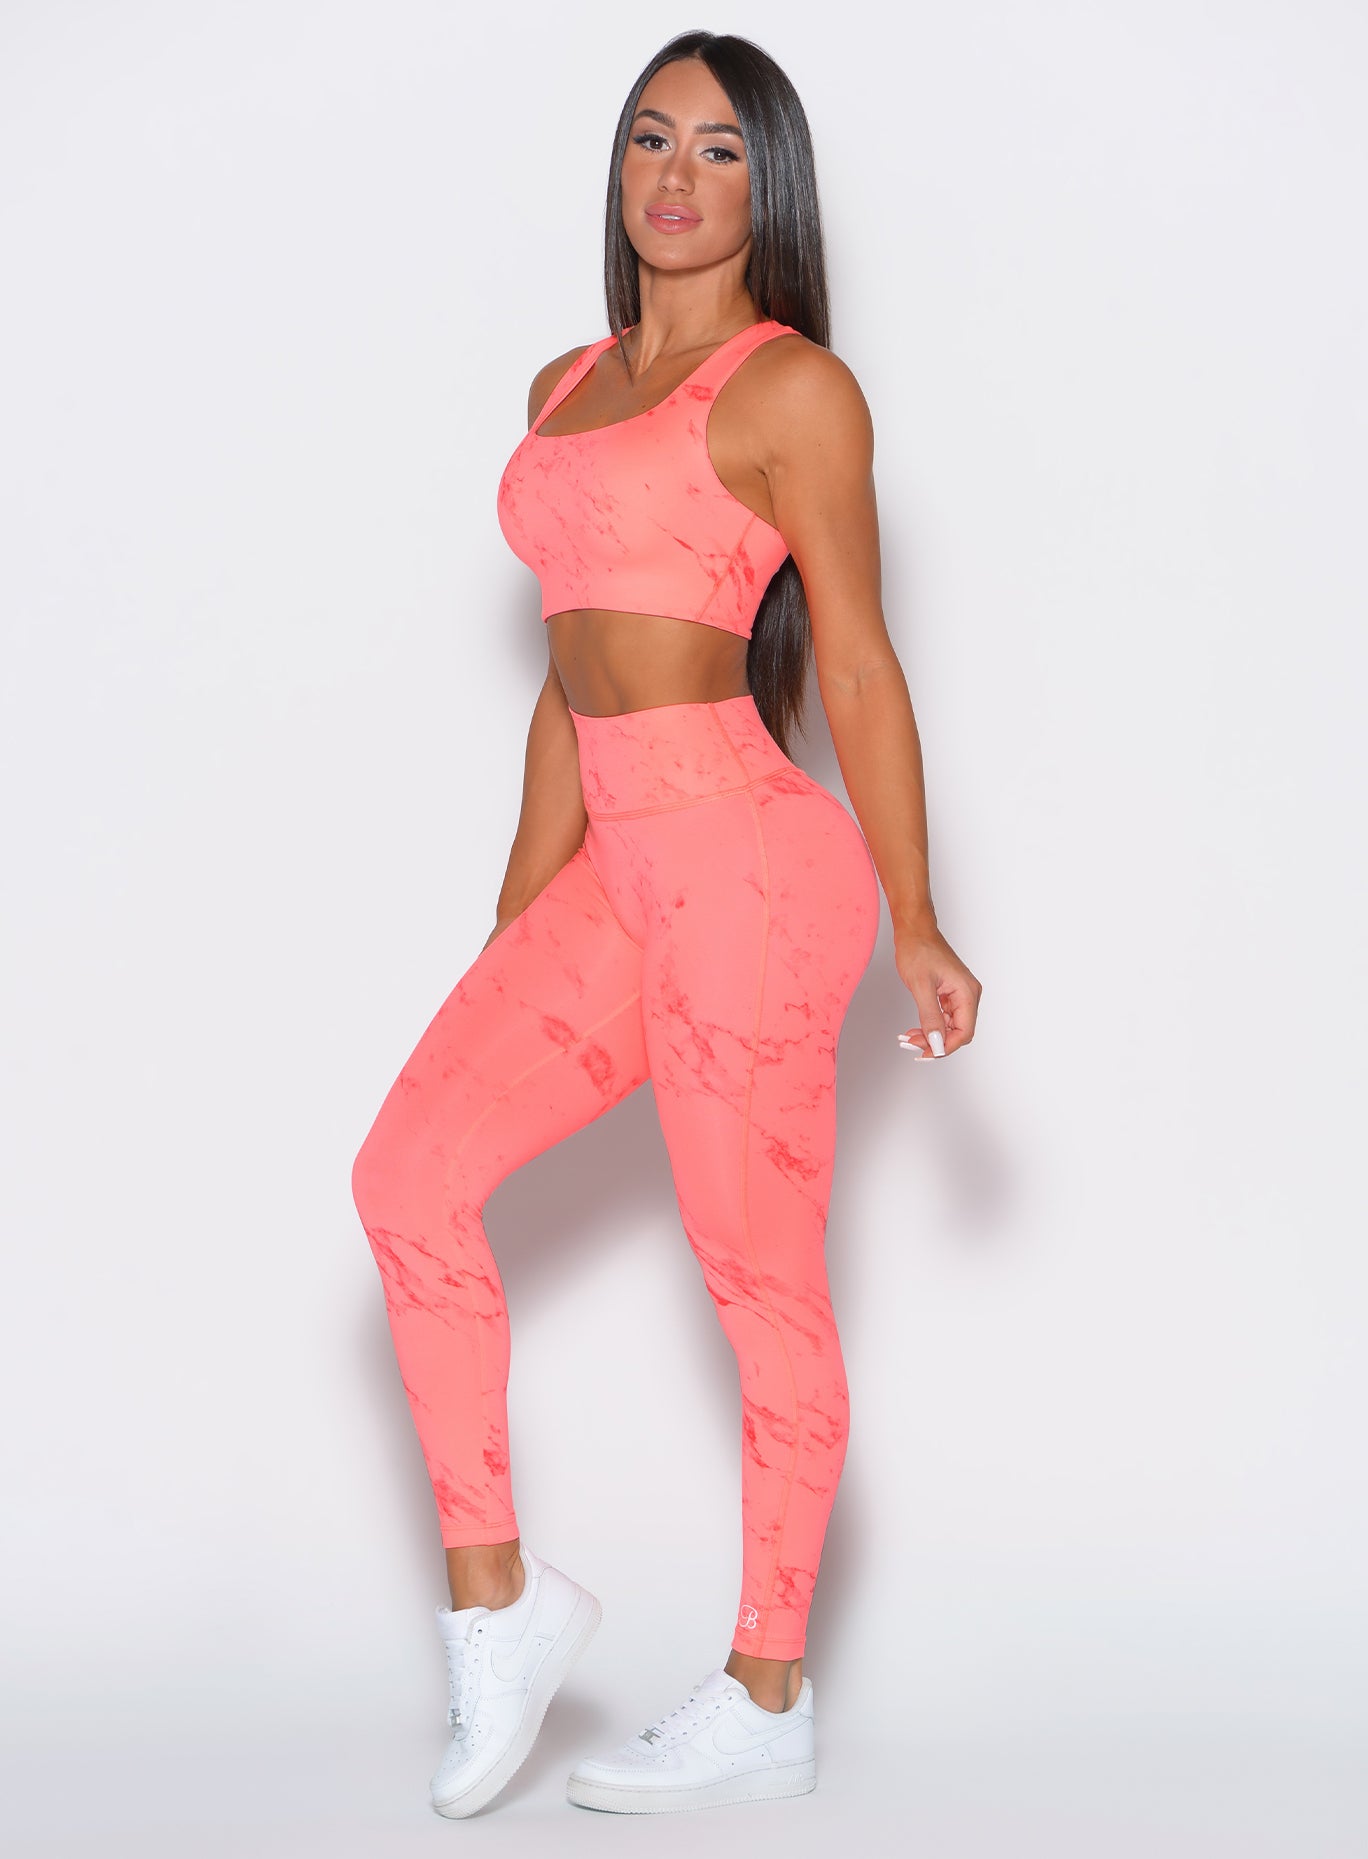 left side profile view of a model facing to the camera wearing our fit marble leggings in Coral reef color along with a matching bra